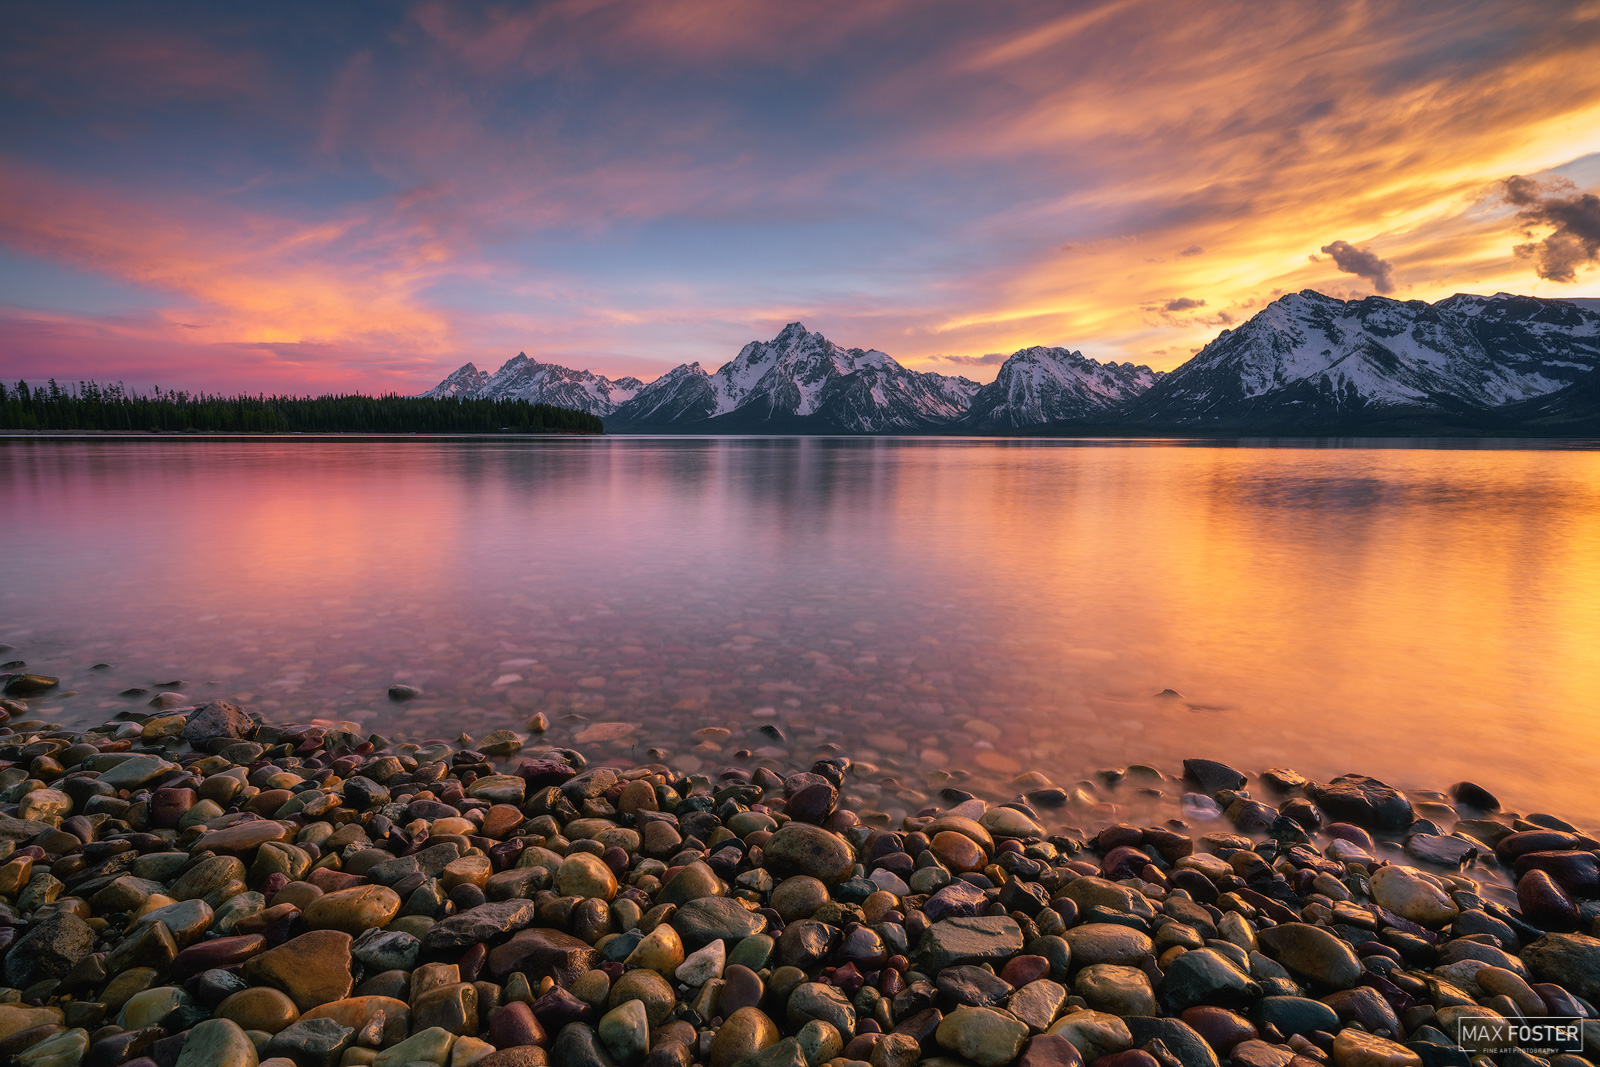 Bring nature into your home with Cloudfire, Max Foster's limited edition photography print of sunset at Jackson Lake in Grand...